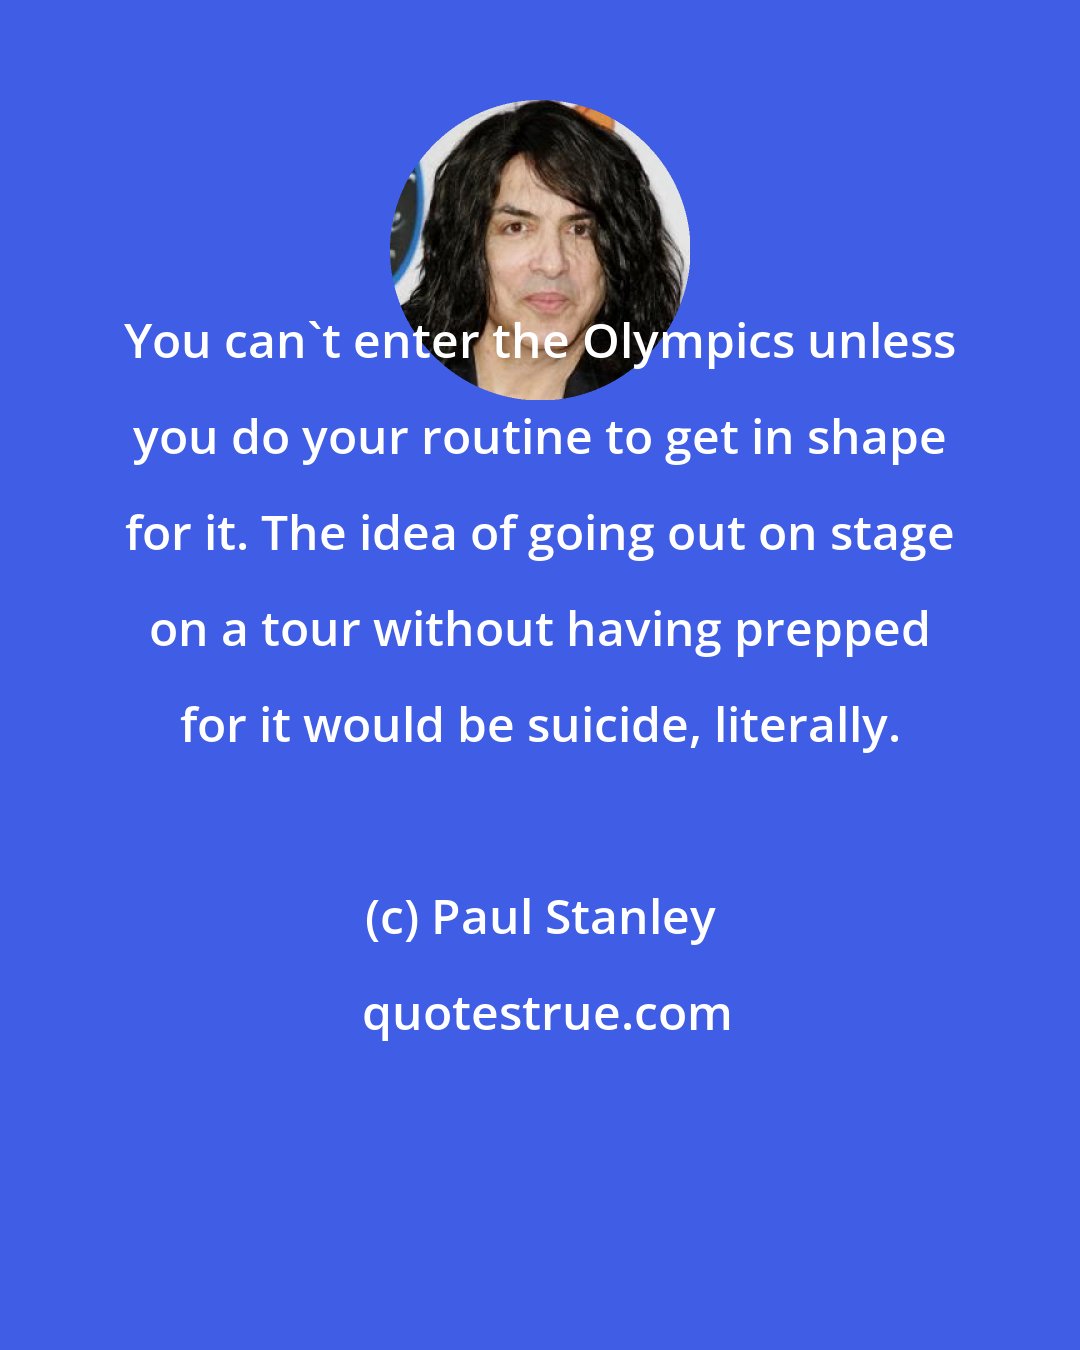 Paul Stanley: You can't enter the Olympics unless you do your routine to get in shape for it. The idea of going out on stage on a tour without having prepped for it would be suicide, literally.